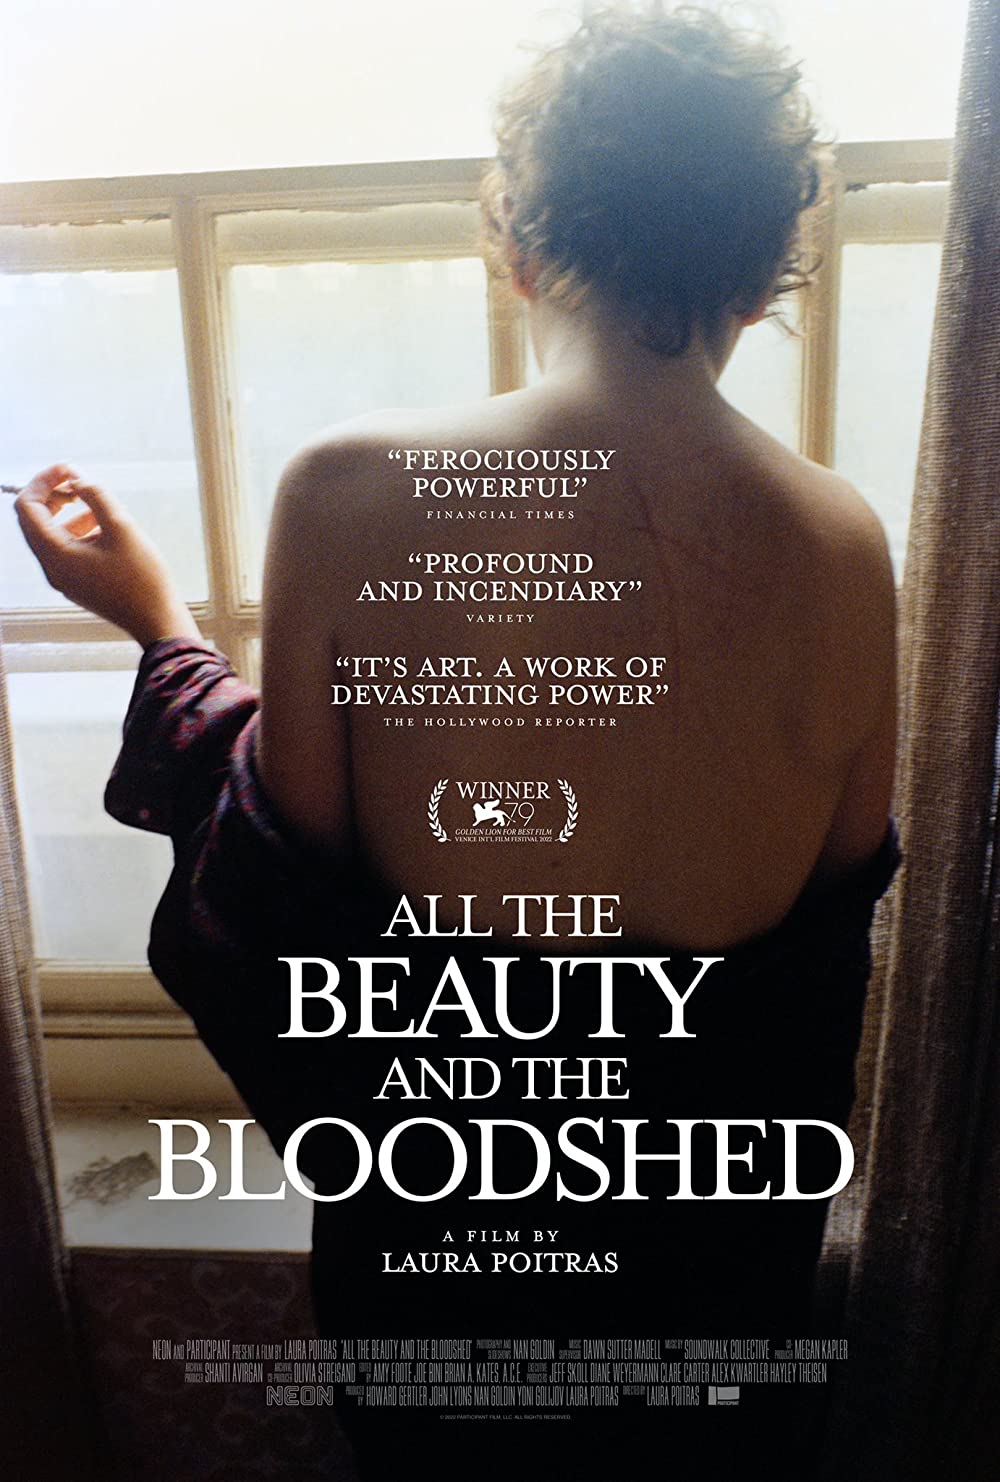 All the Beauty and the Bloodshed Parents Guide | All the Beauty and the Bloodshed Rating 2022